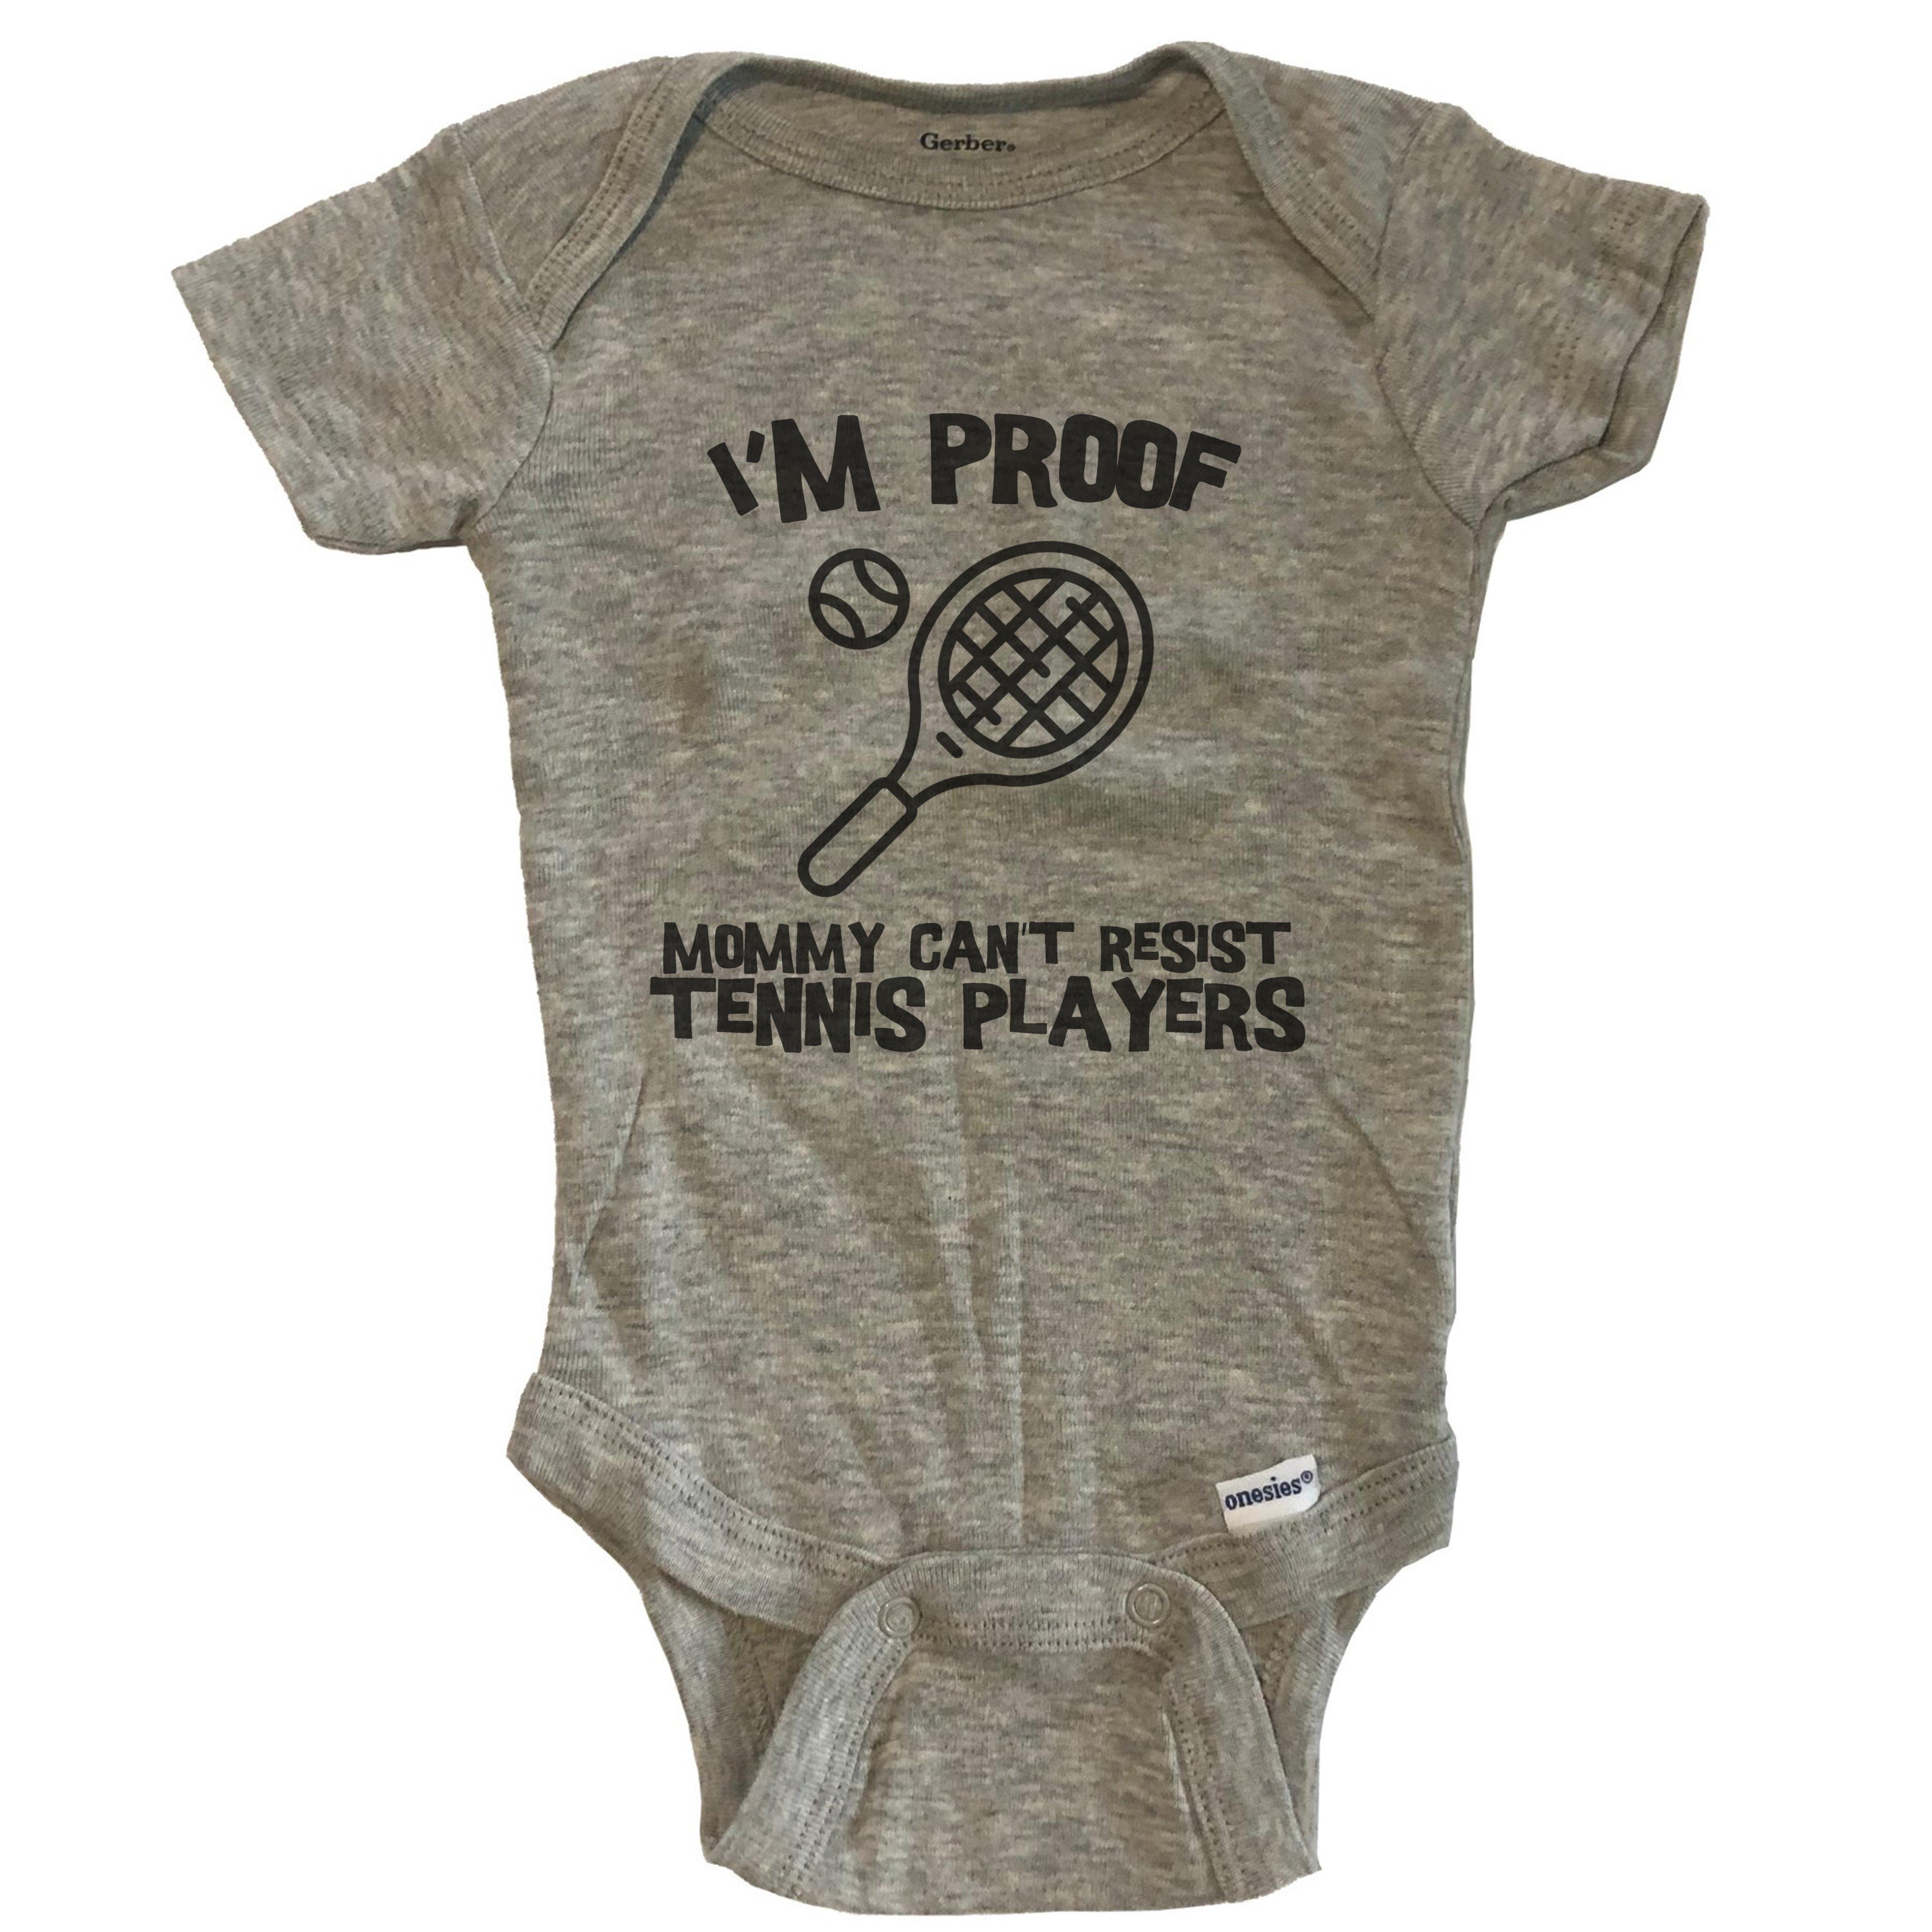 I'm Proof Mommy Can't Resist Tennis Players Funny Tennis Baby Bodysuit -  Grey 